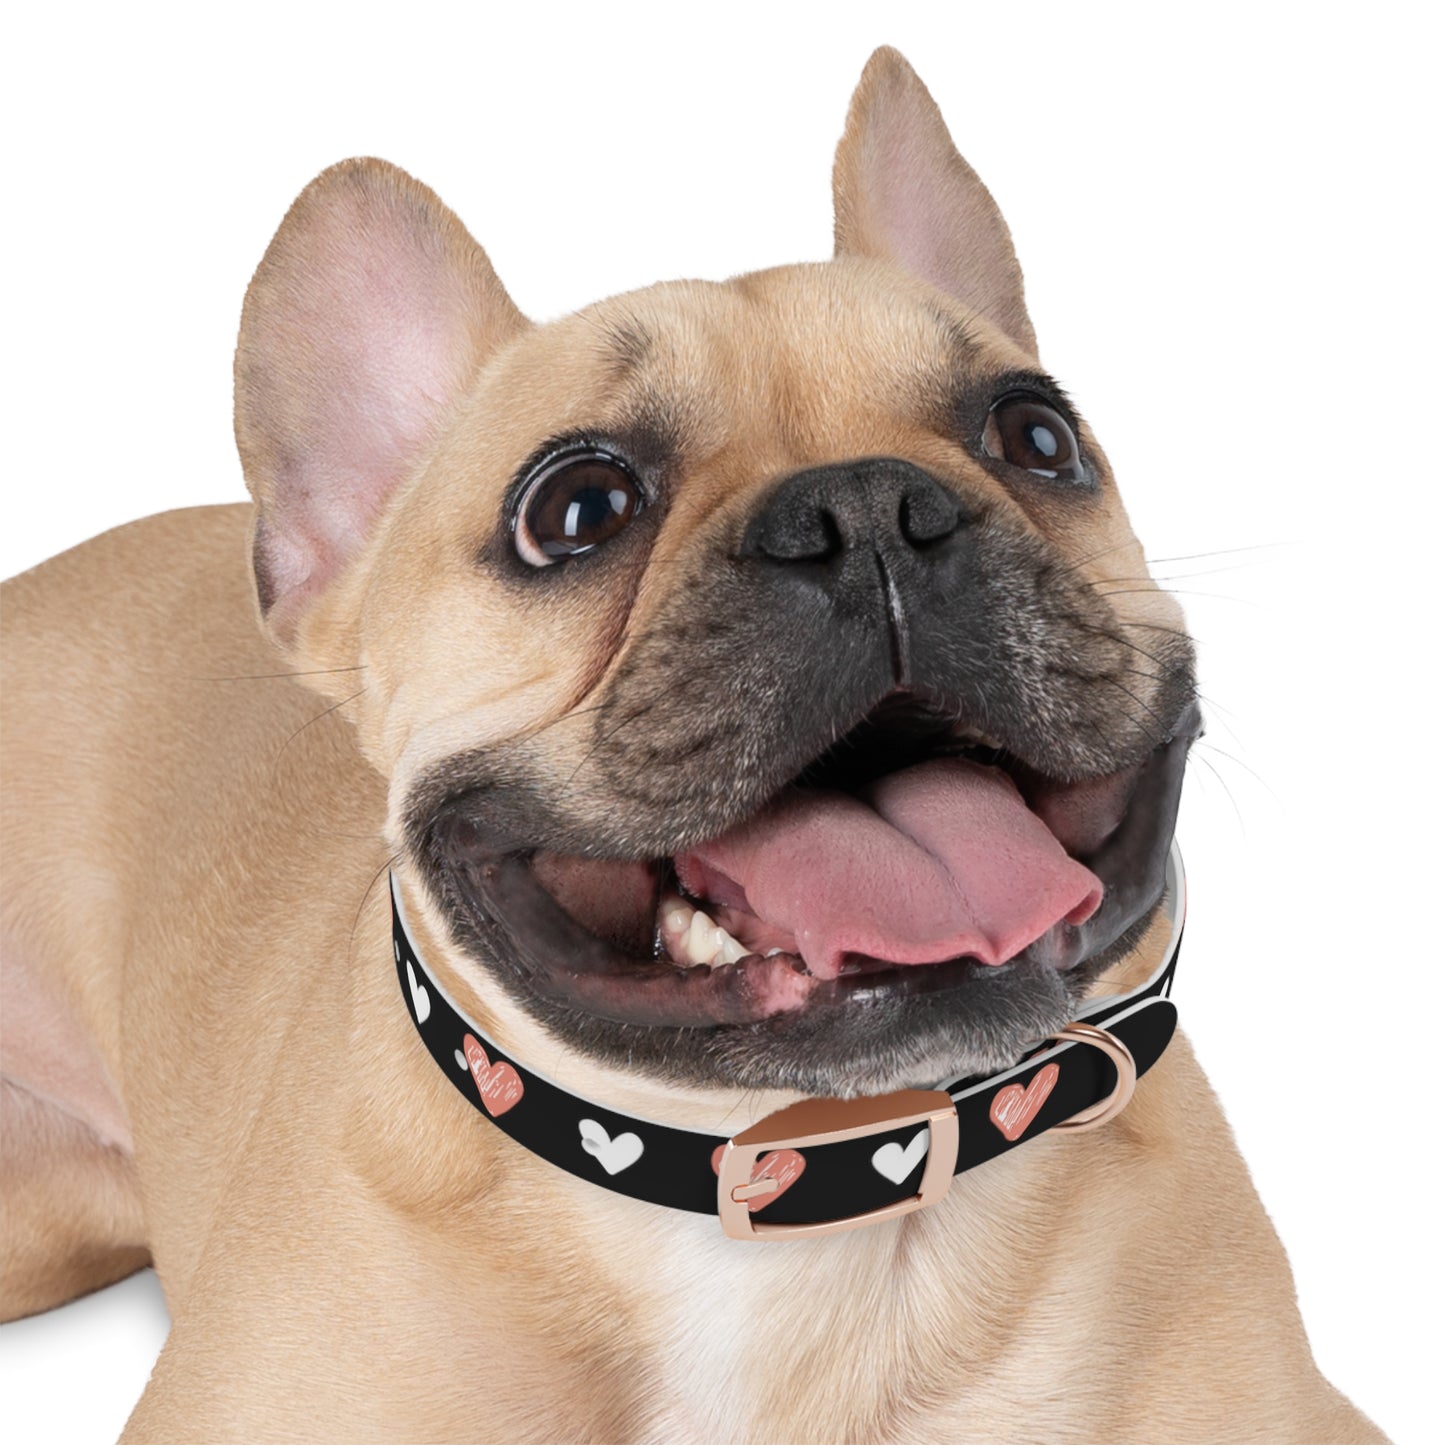 a cute bulldog wearing a dog collar with a beautiful hearts pattern design. The color of the dog collar is black